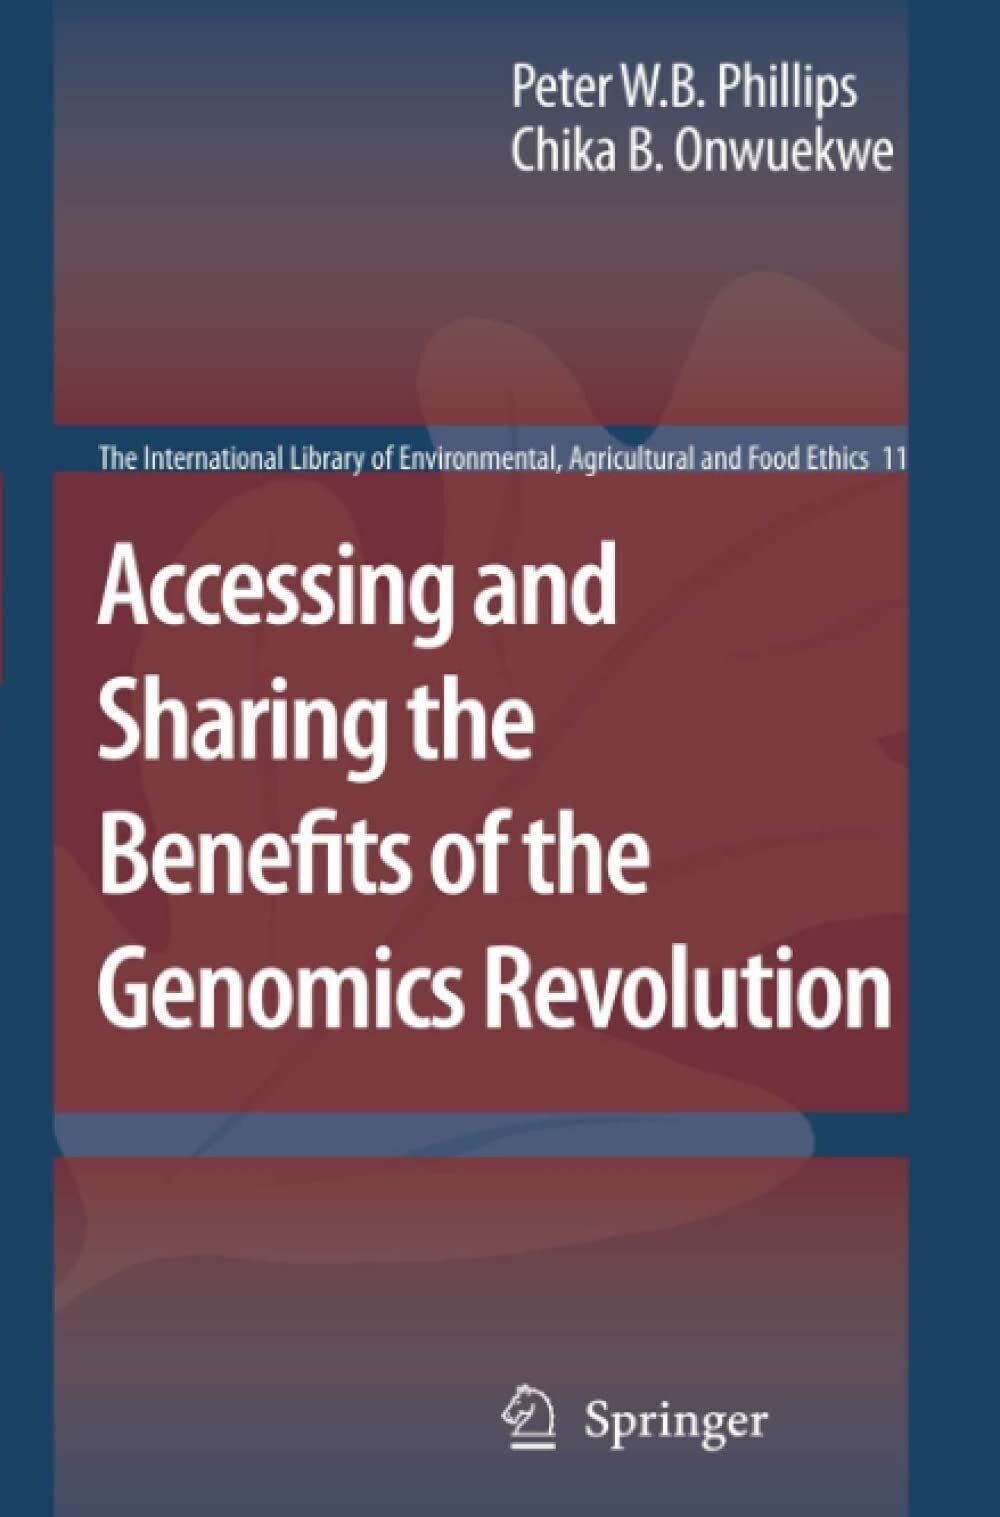 Accessing and Sharing the Benefits of the Genomics Revolution - Springer, 2010